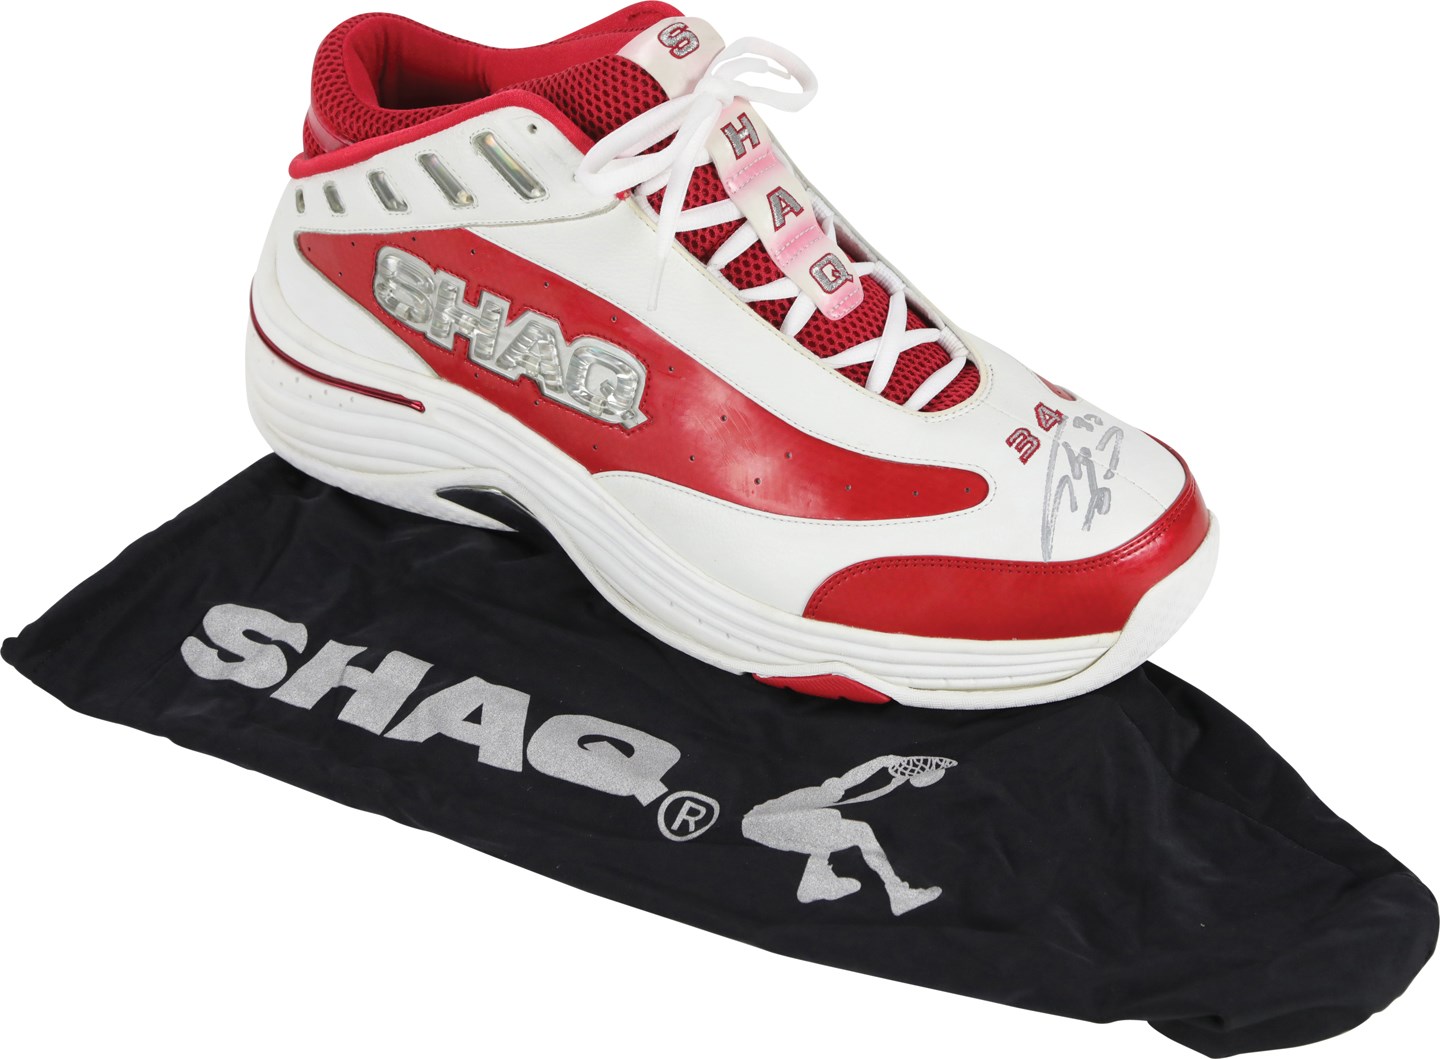 - Shaquille O'Neal Size 22 Signed Promotional Sneaker (PSA)